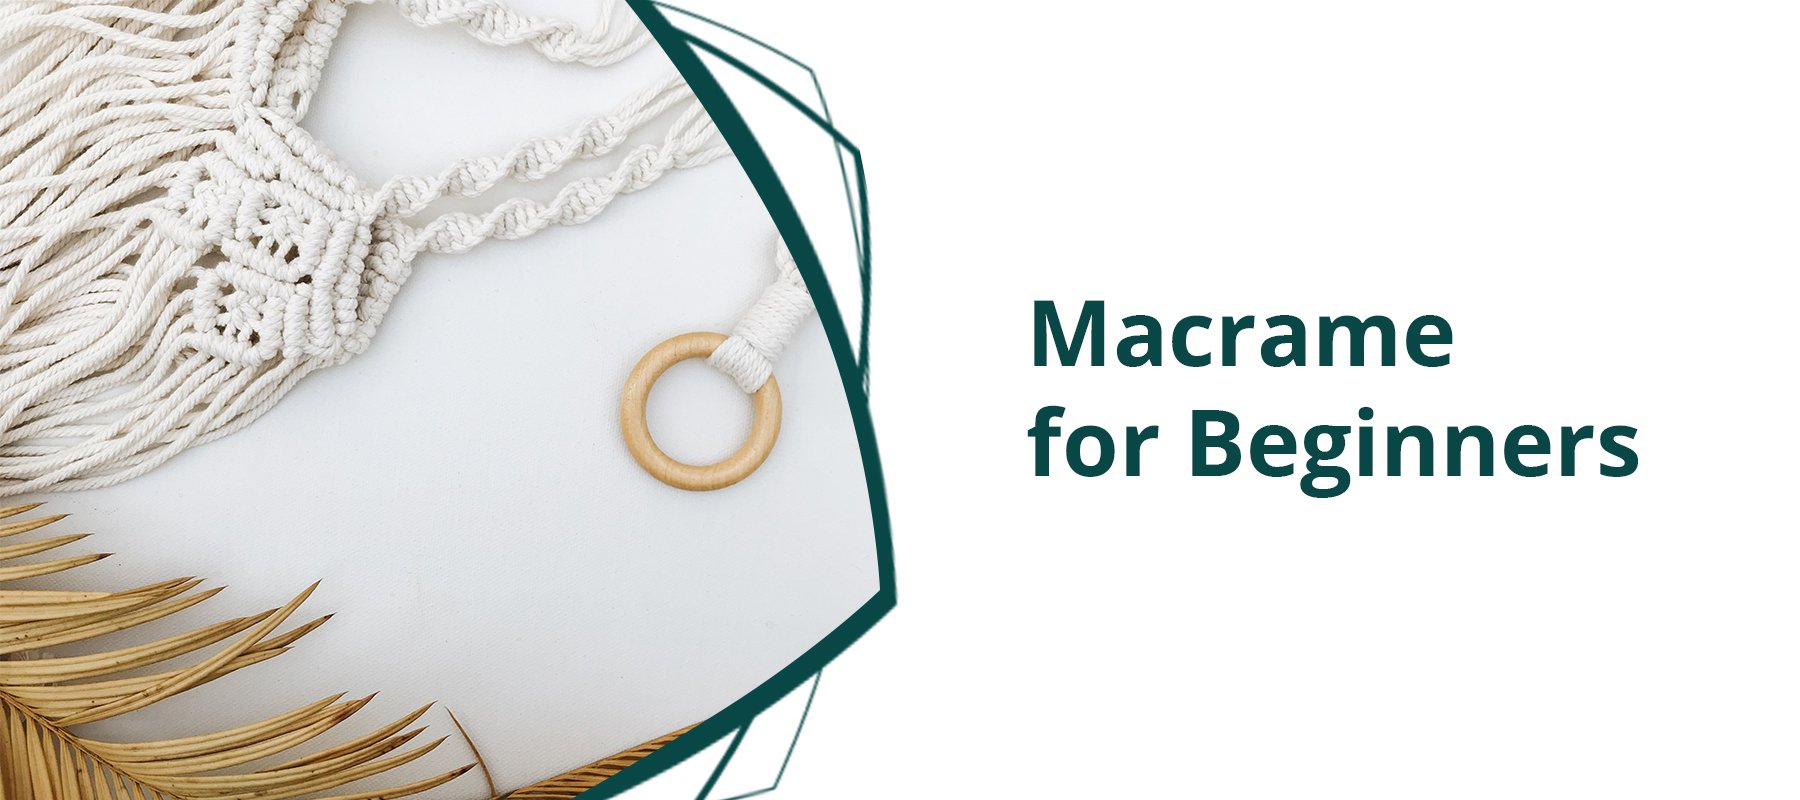 Macrame for Beginners: How to Choose the Right Macrame String, Rope, or Cord